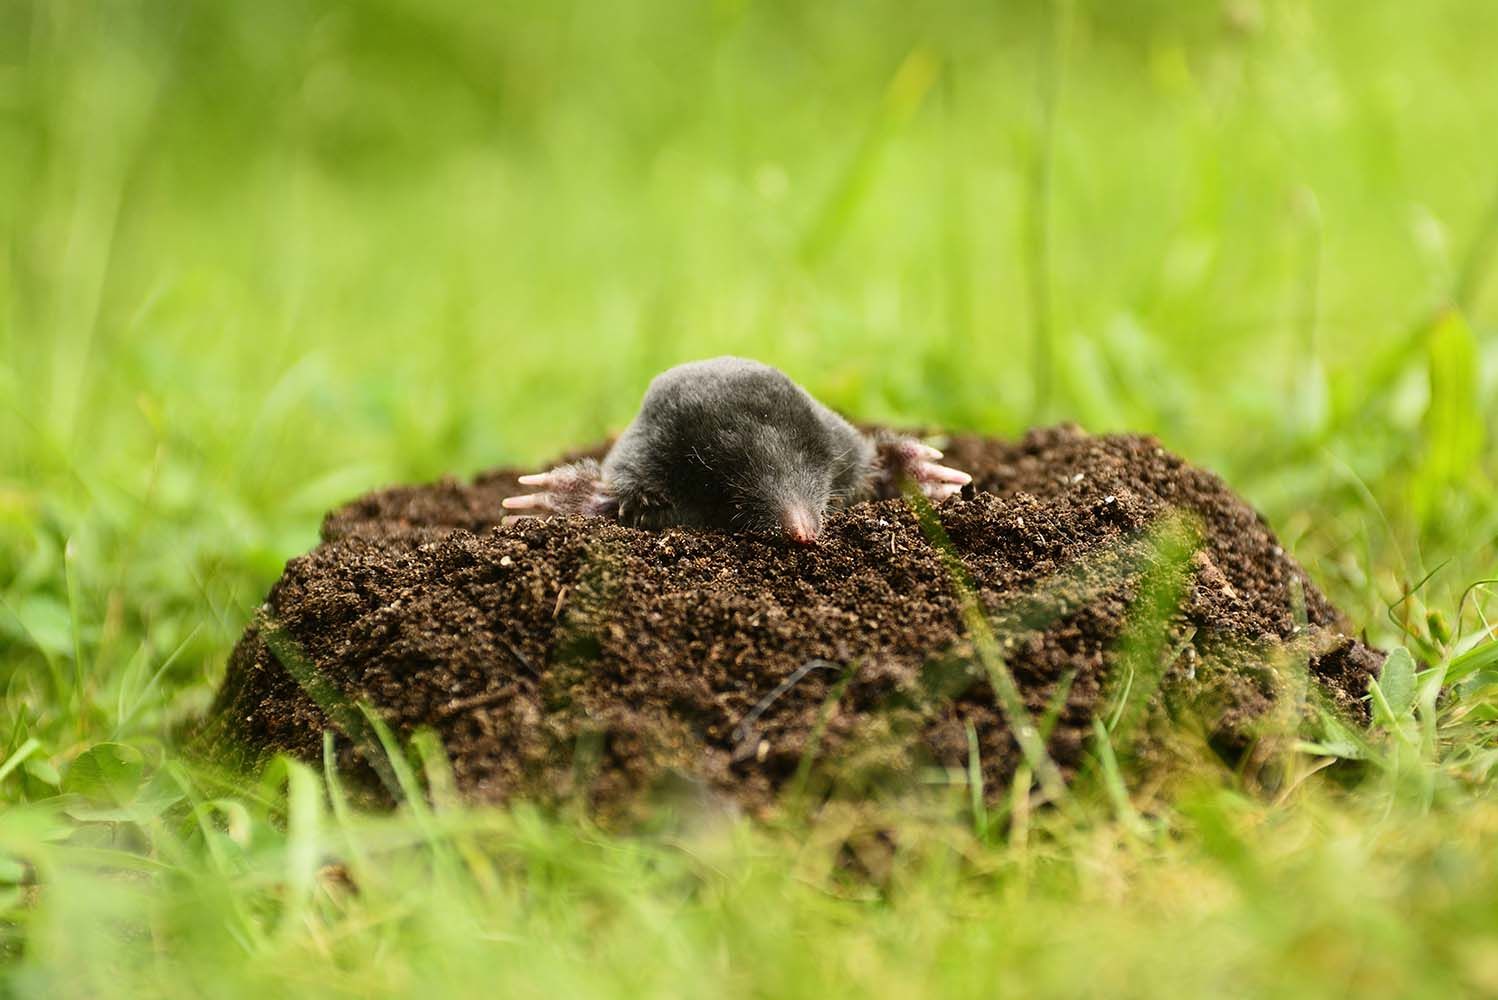 How to Get Rid of Moles? 4 Proven Mole Traps and Repellents